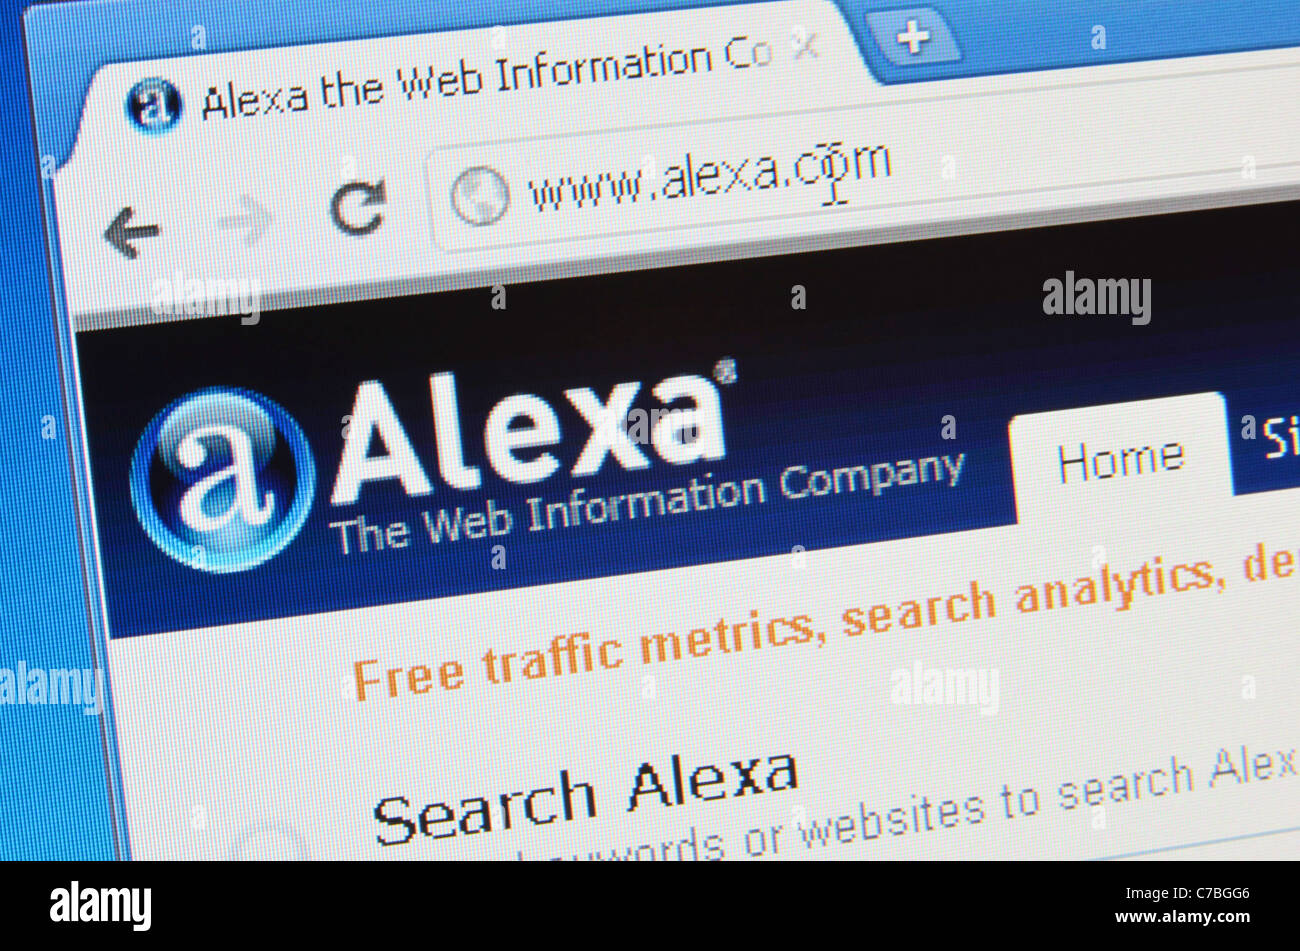 Alexa Rank High Resolution Stock Photography and Images - Alamy